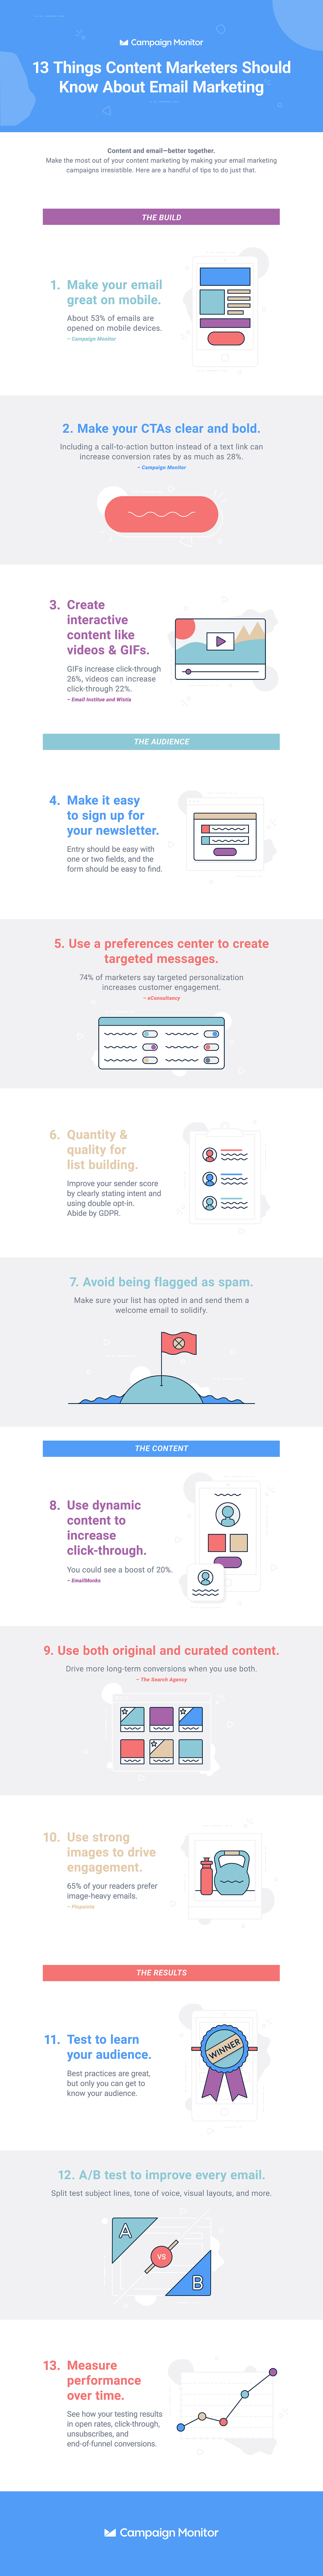 Email Content Marketing Infographic